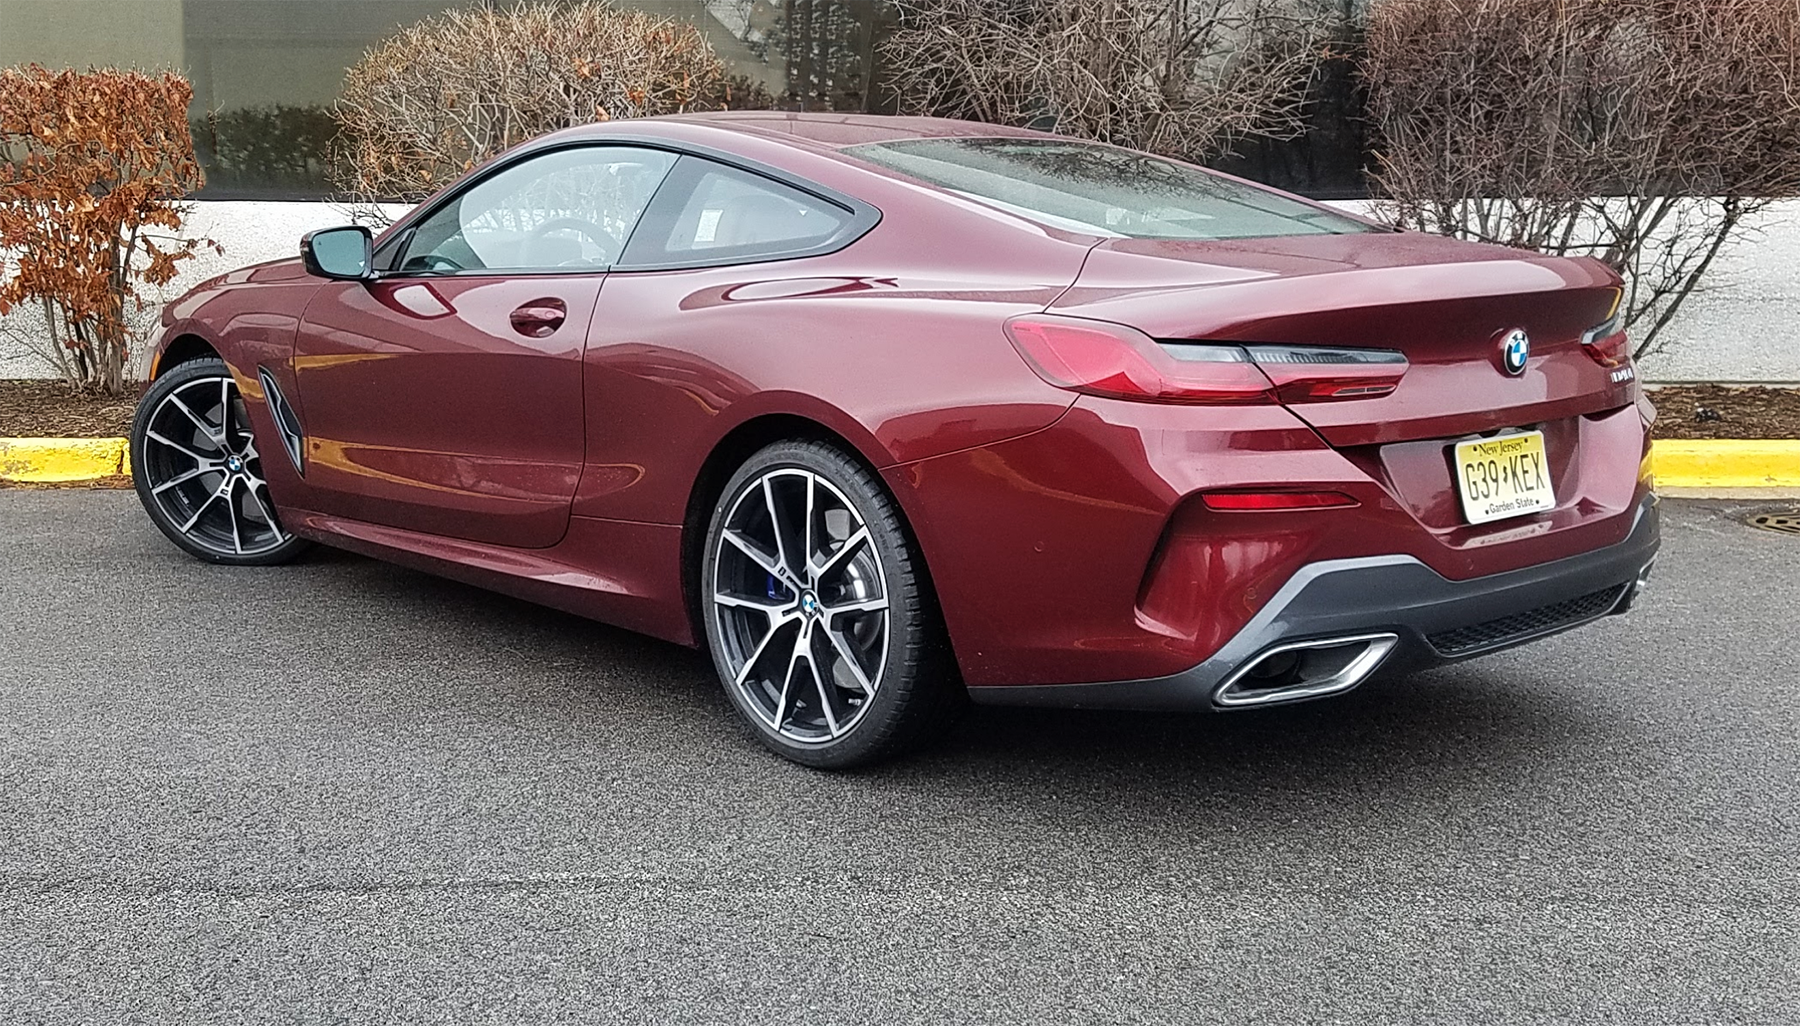 Test Drive: 2020 BMW 840i Coupe – ViewMyGarage.com – The Ultimate Car